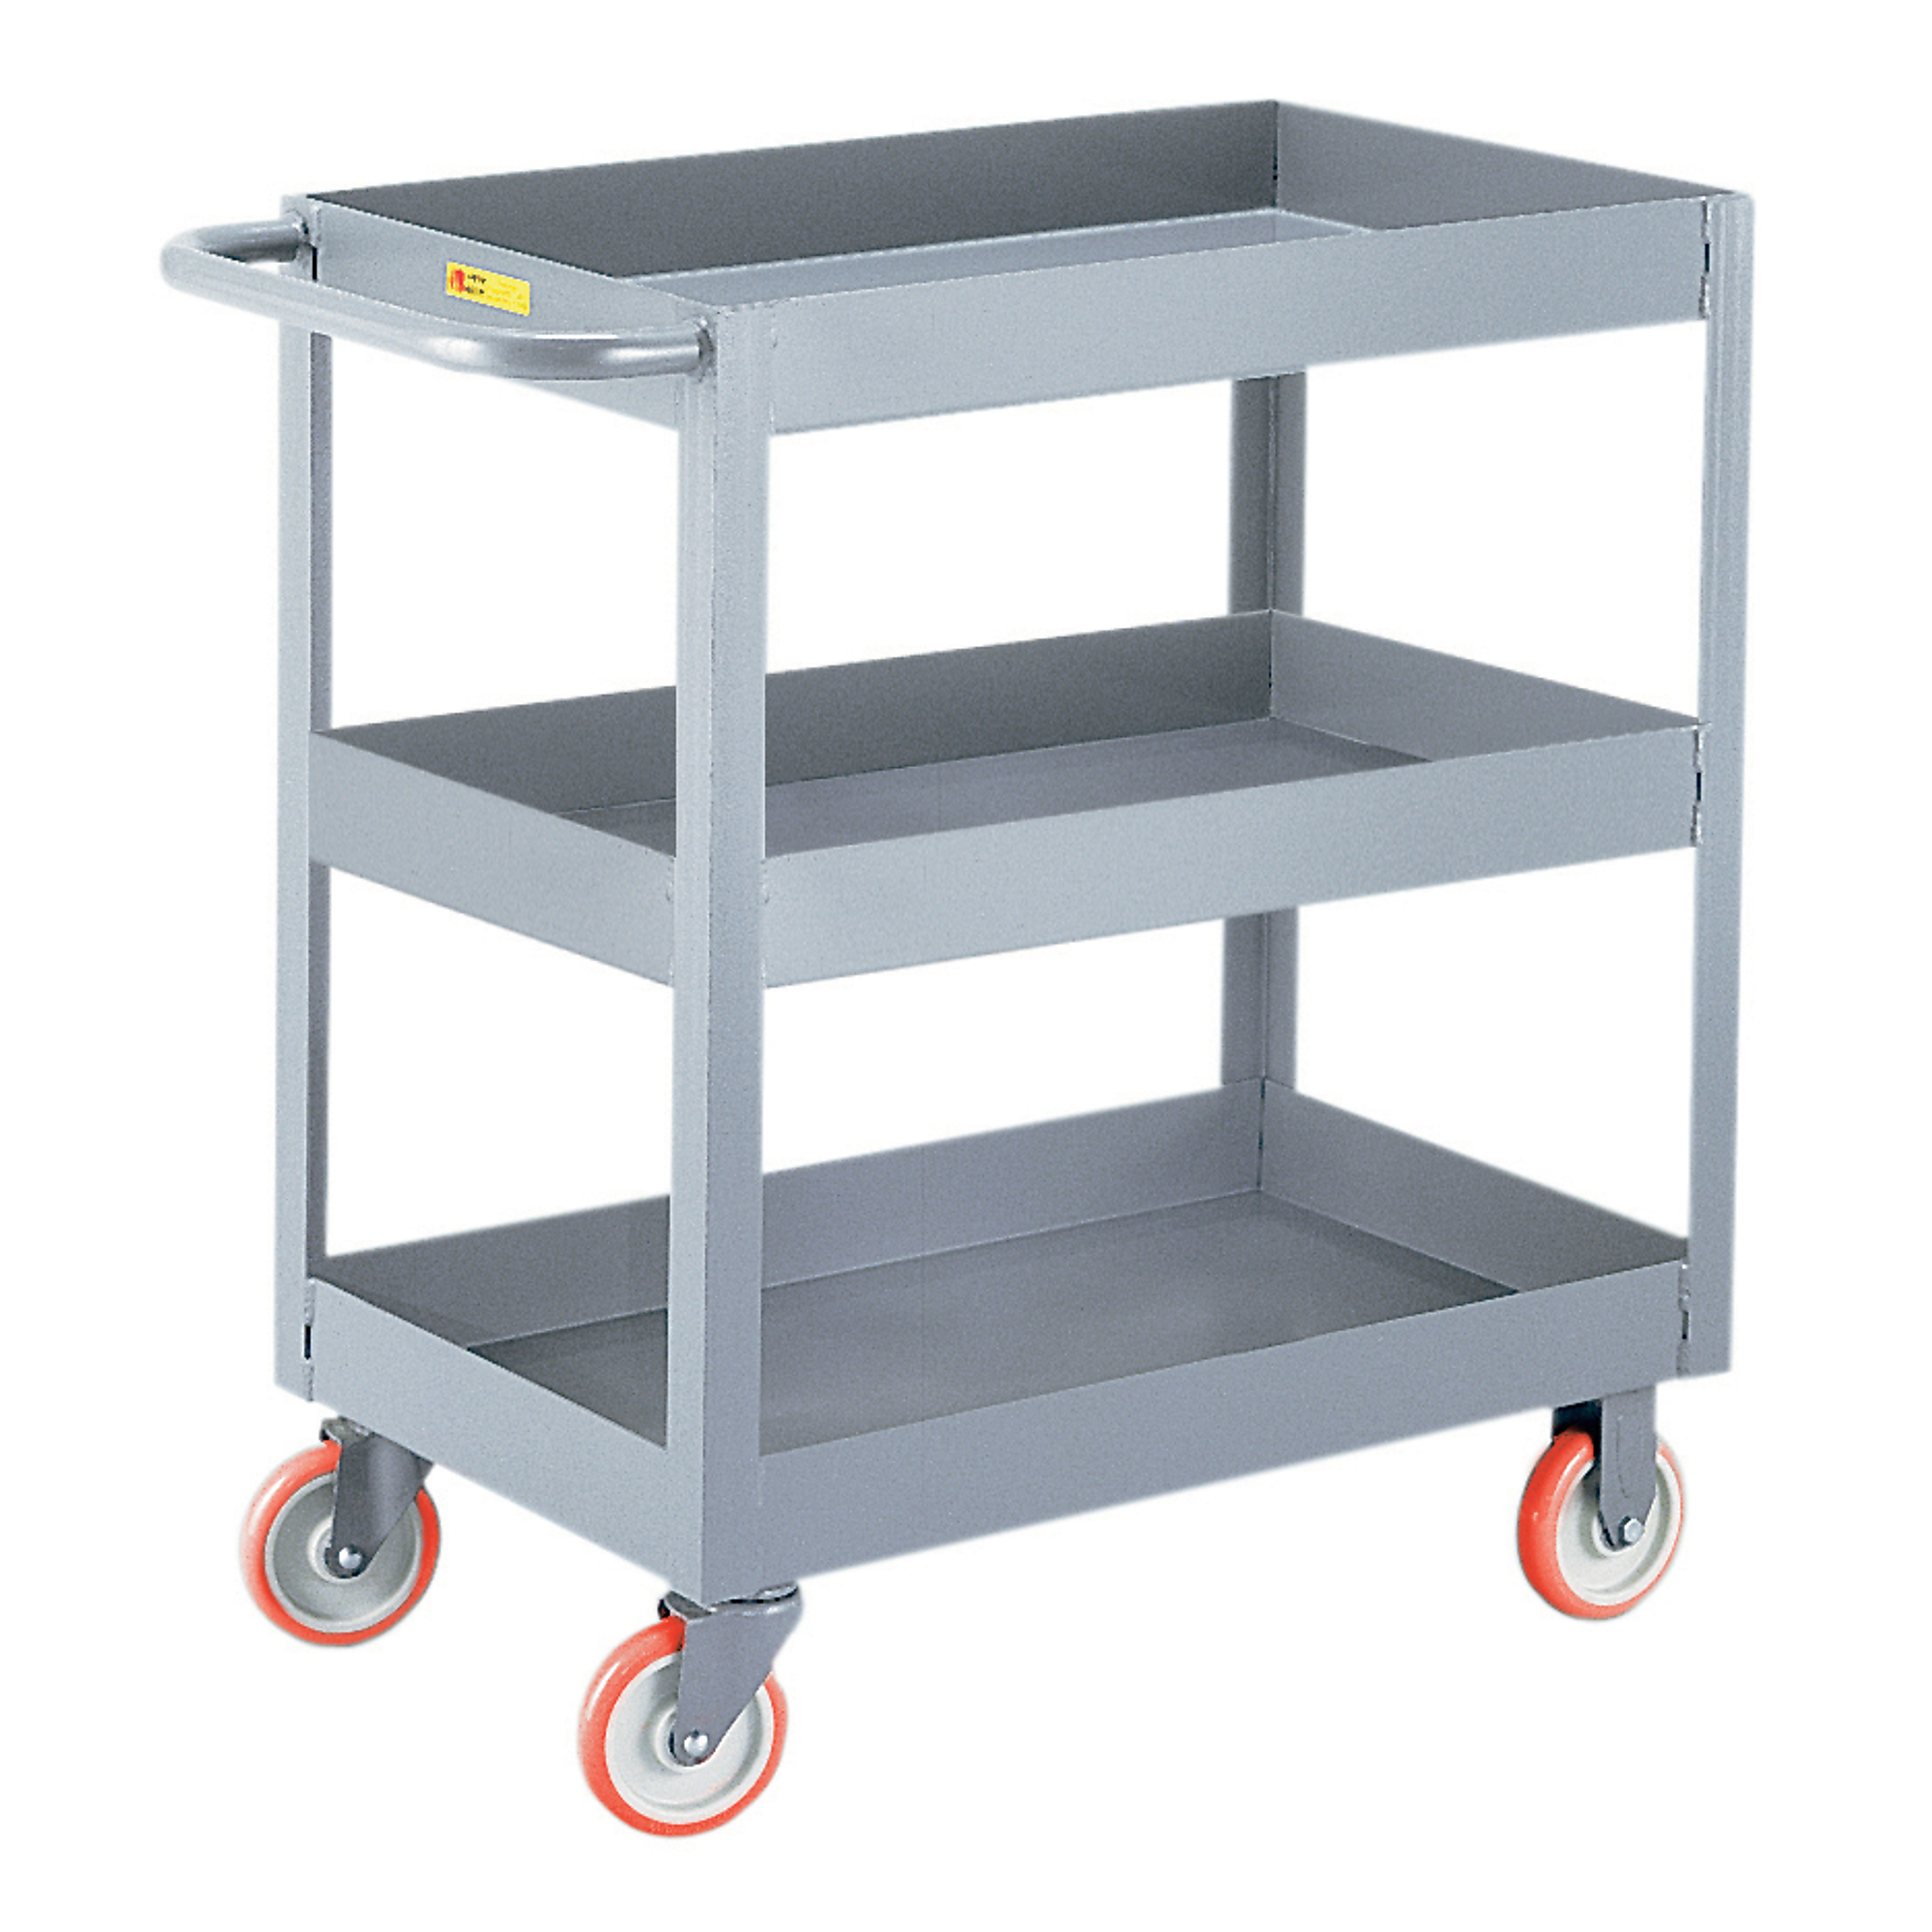 Little Giant, 3Inch Deep Shelf Truck, 24x36, 1200 lbs, Total Capacity 1200 lb, Shelves (qty.) 3, Material Carbon Steel, Model 3DS2436X3-5PY